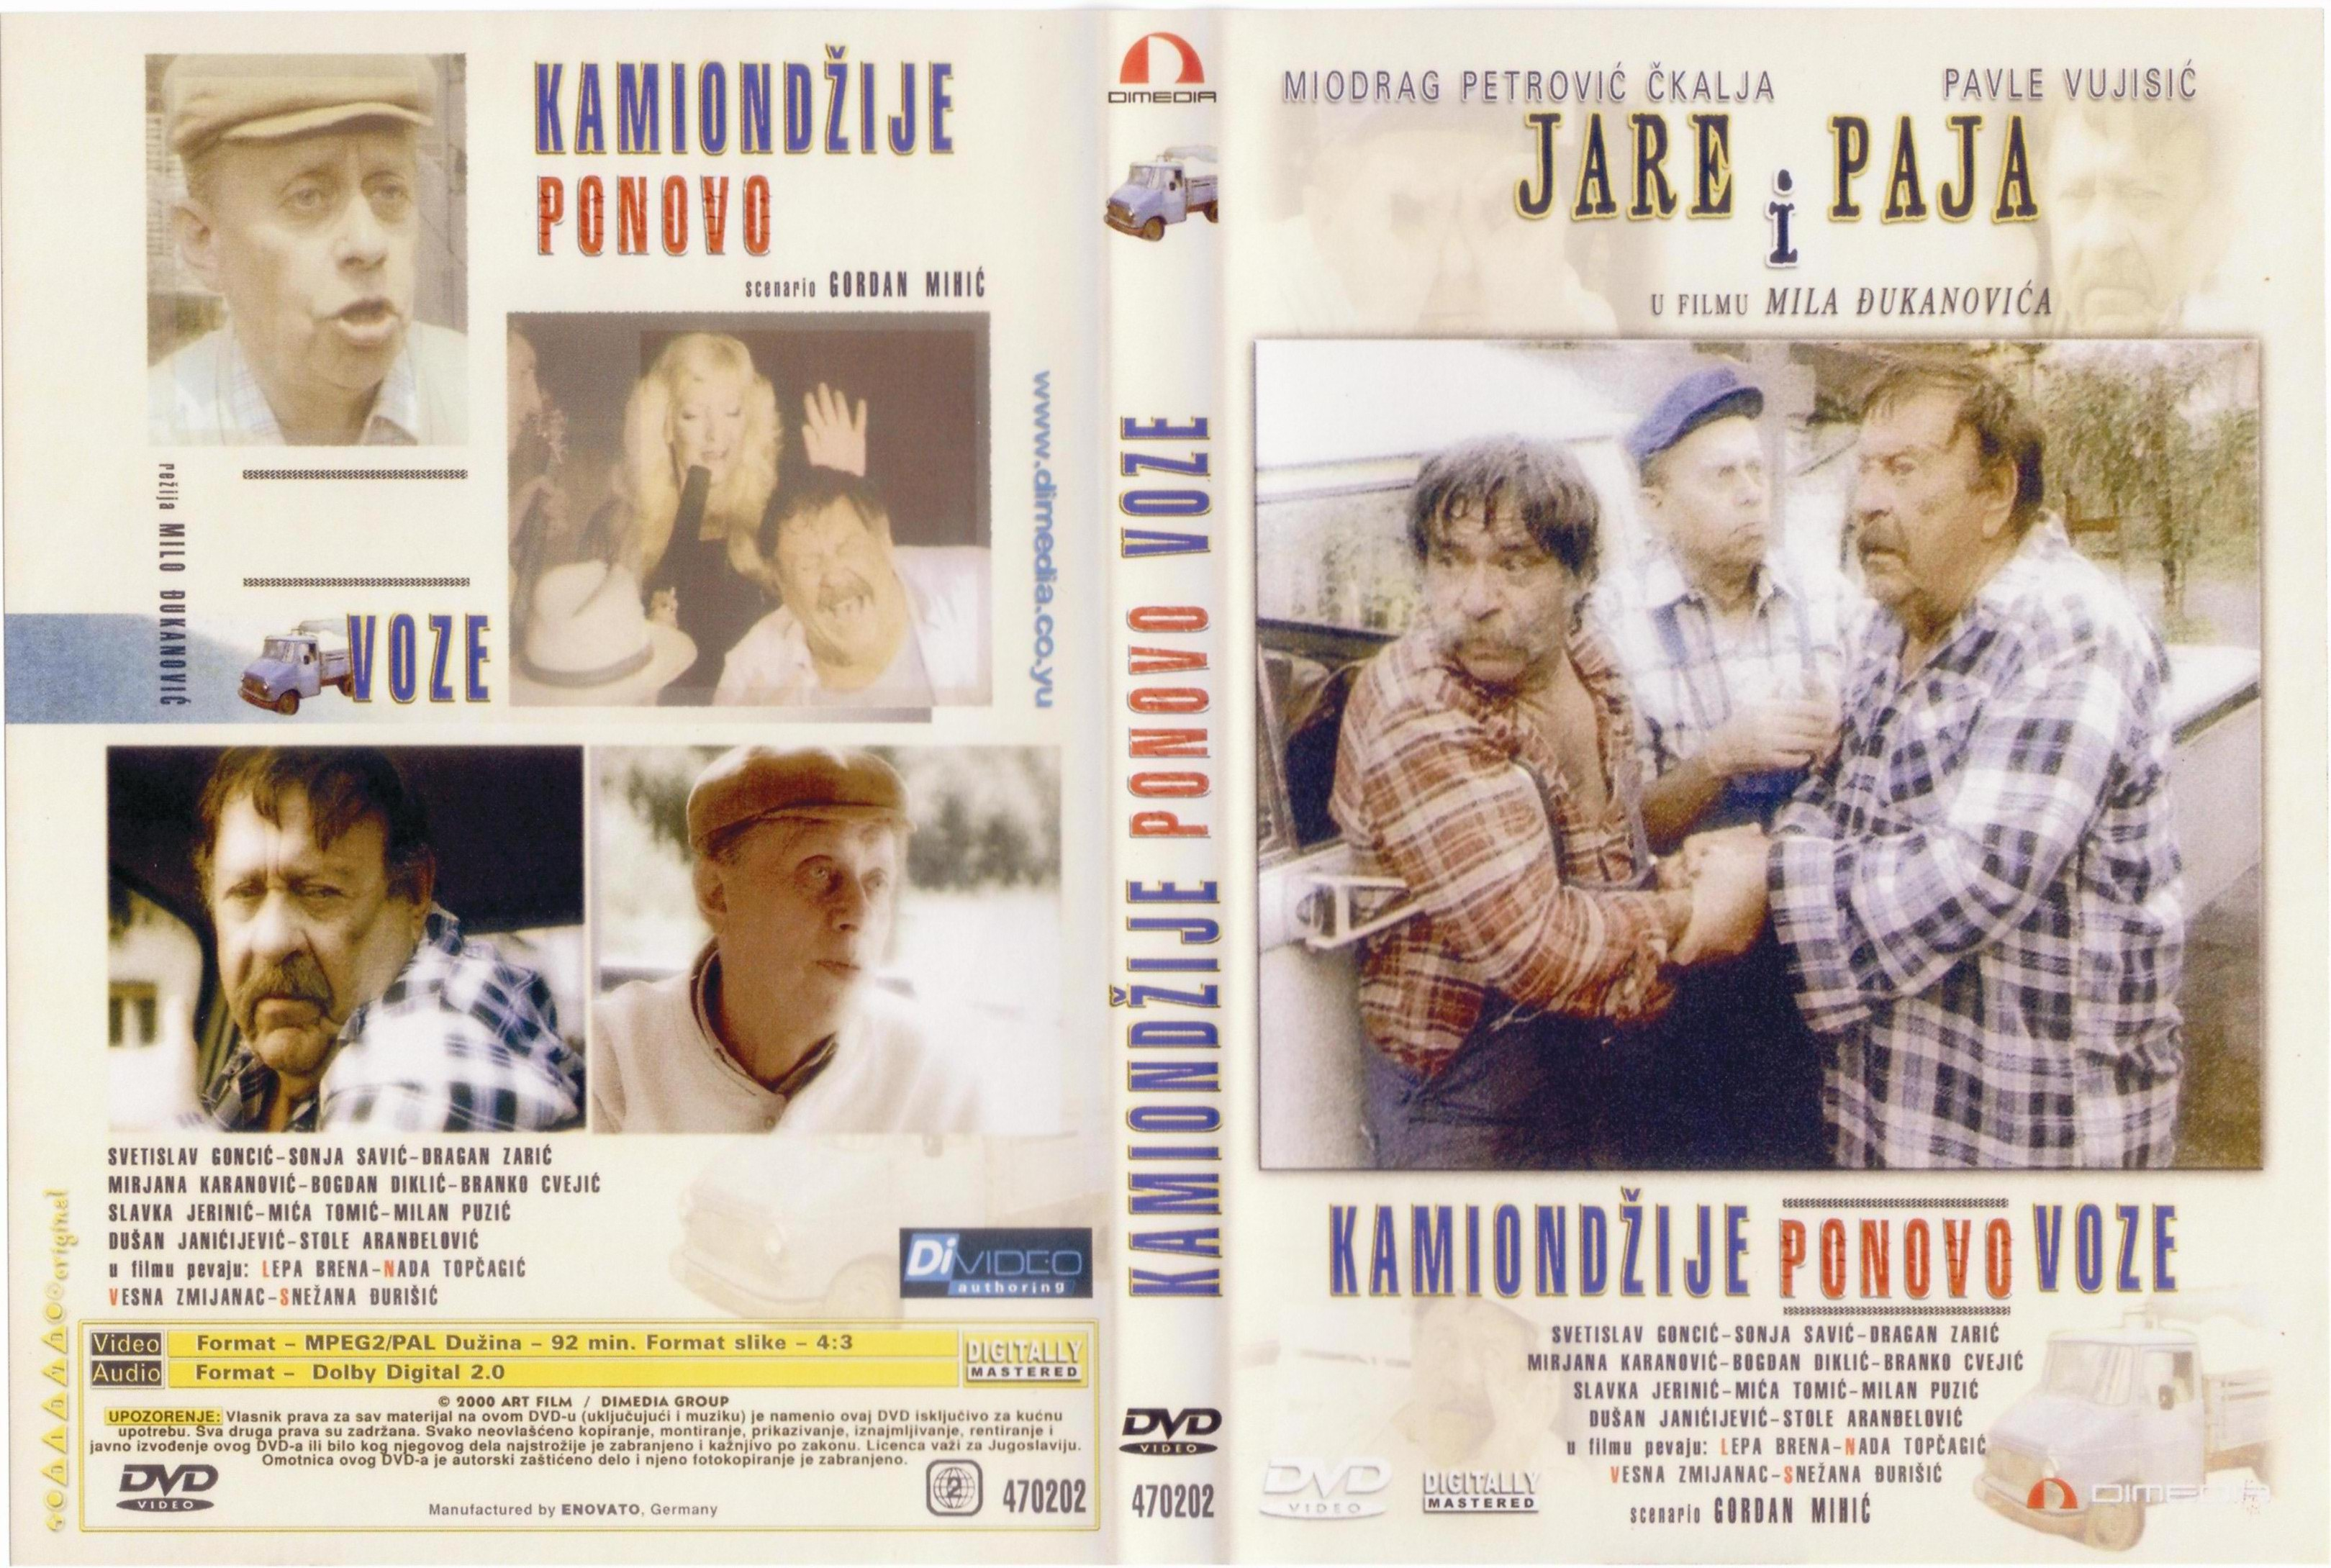 Click to view full size image -  DVD Cover - 0-9 - DVD - KAMIONDJIJE PONOVO VOZE - DVD - KAMIONDJIJE PONOVO VOZE.jpg